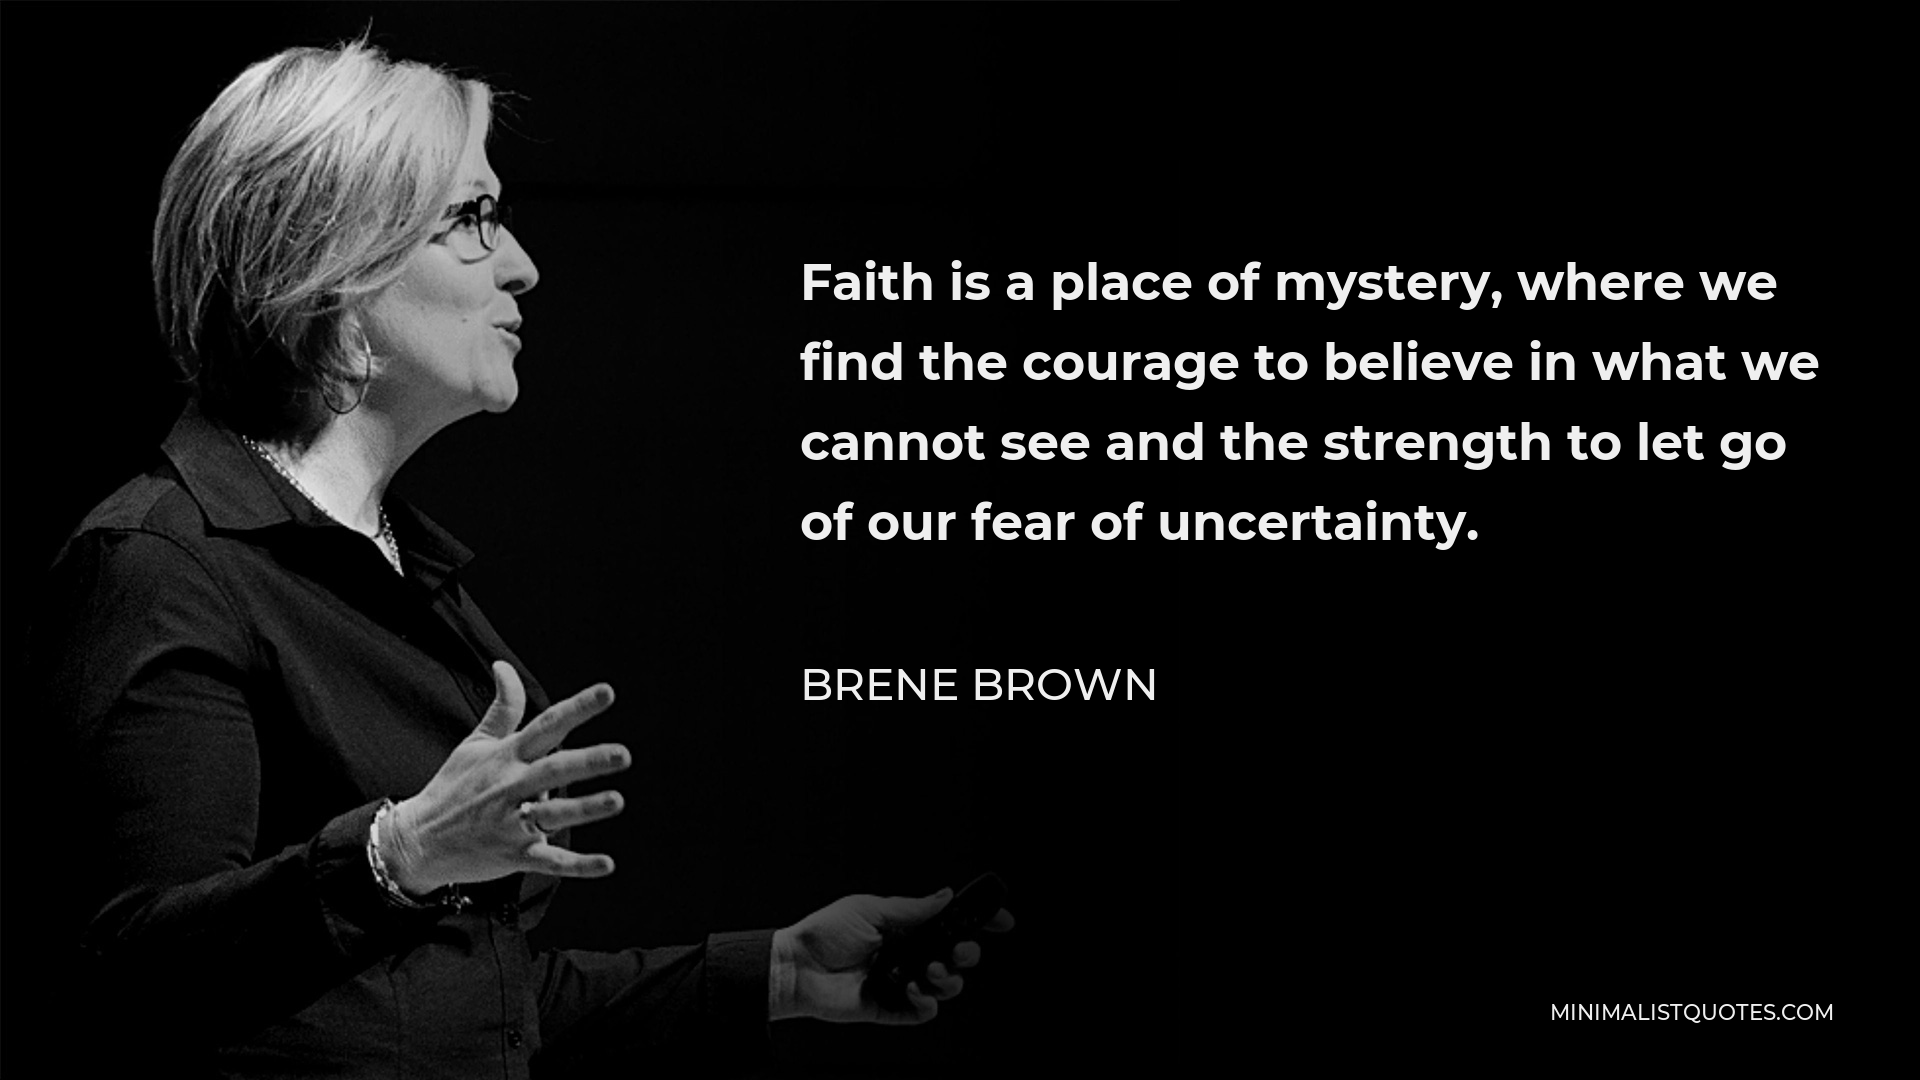 Brene Brown Quote - Faith is a place of mystery, where we find the courage to believe in what we cannot see and the strength to let go of our fear of uncertainty.